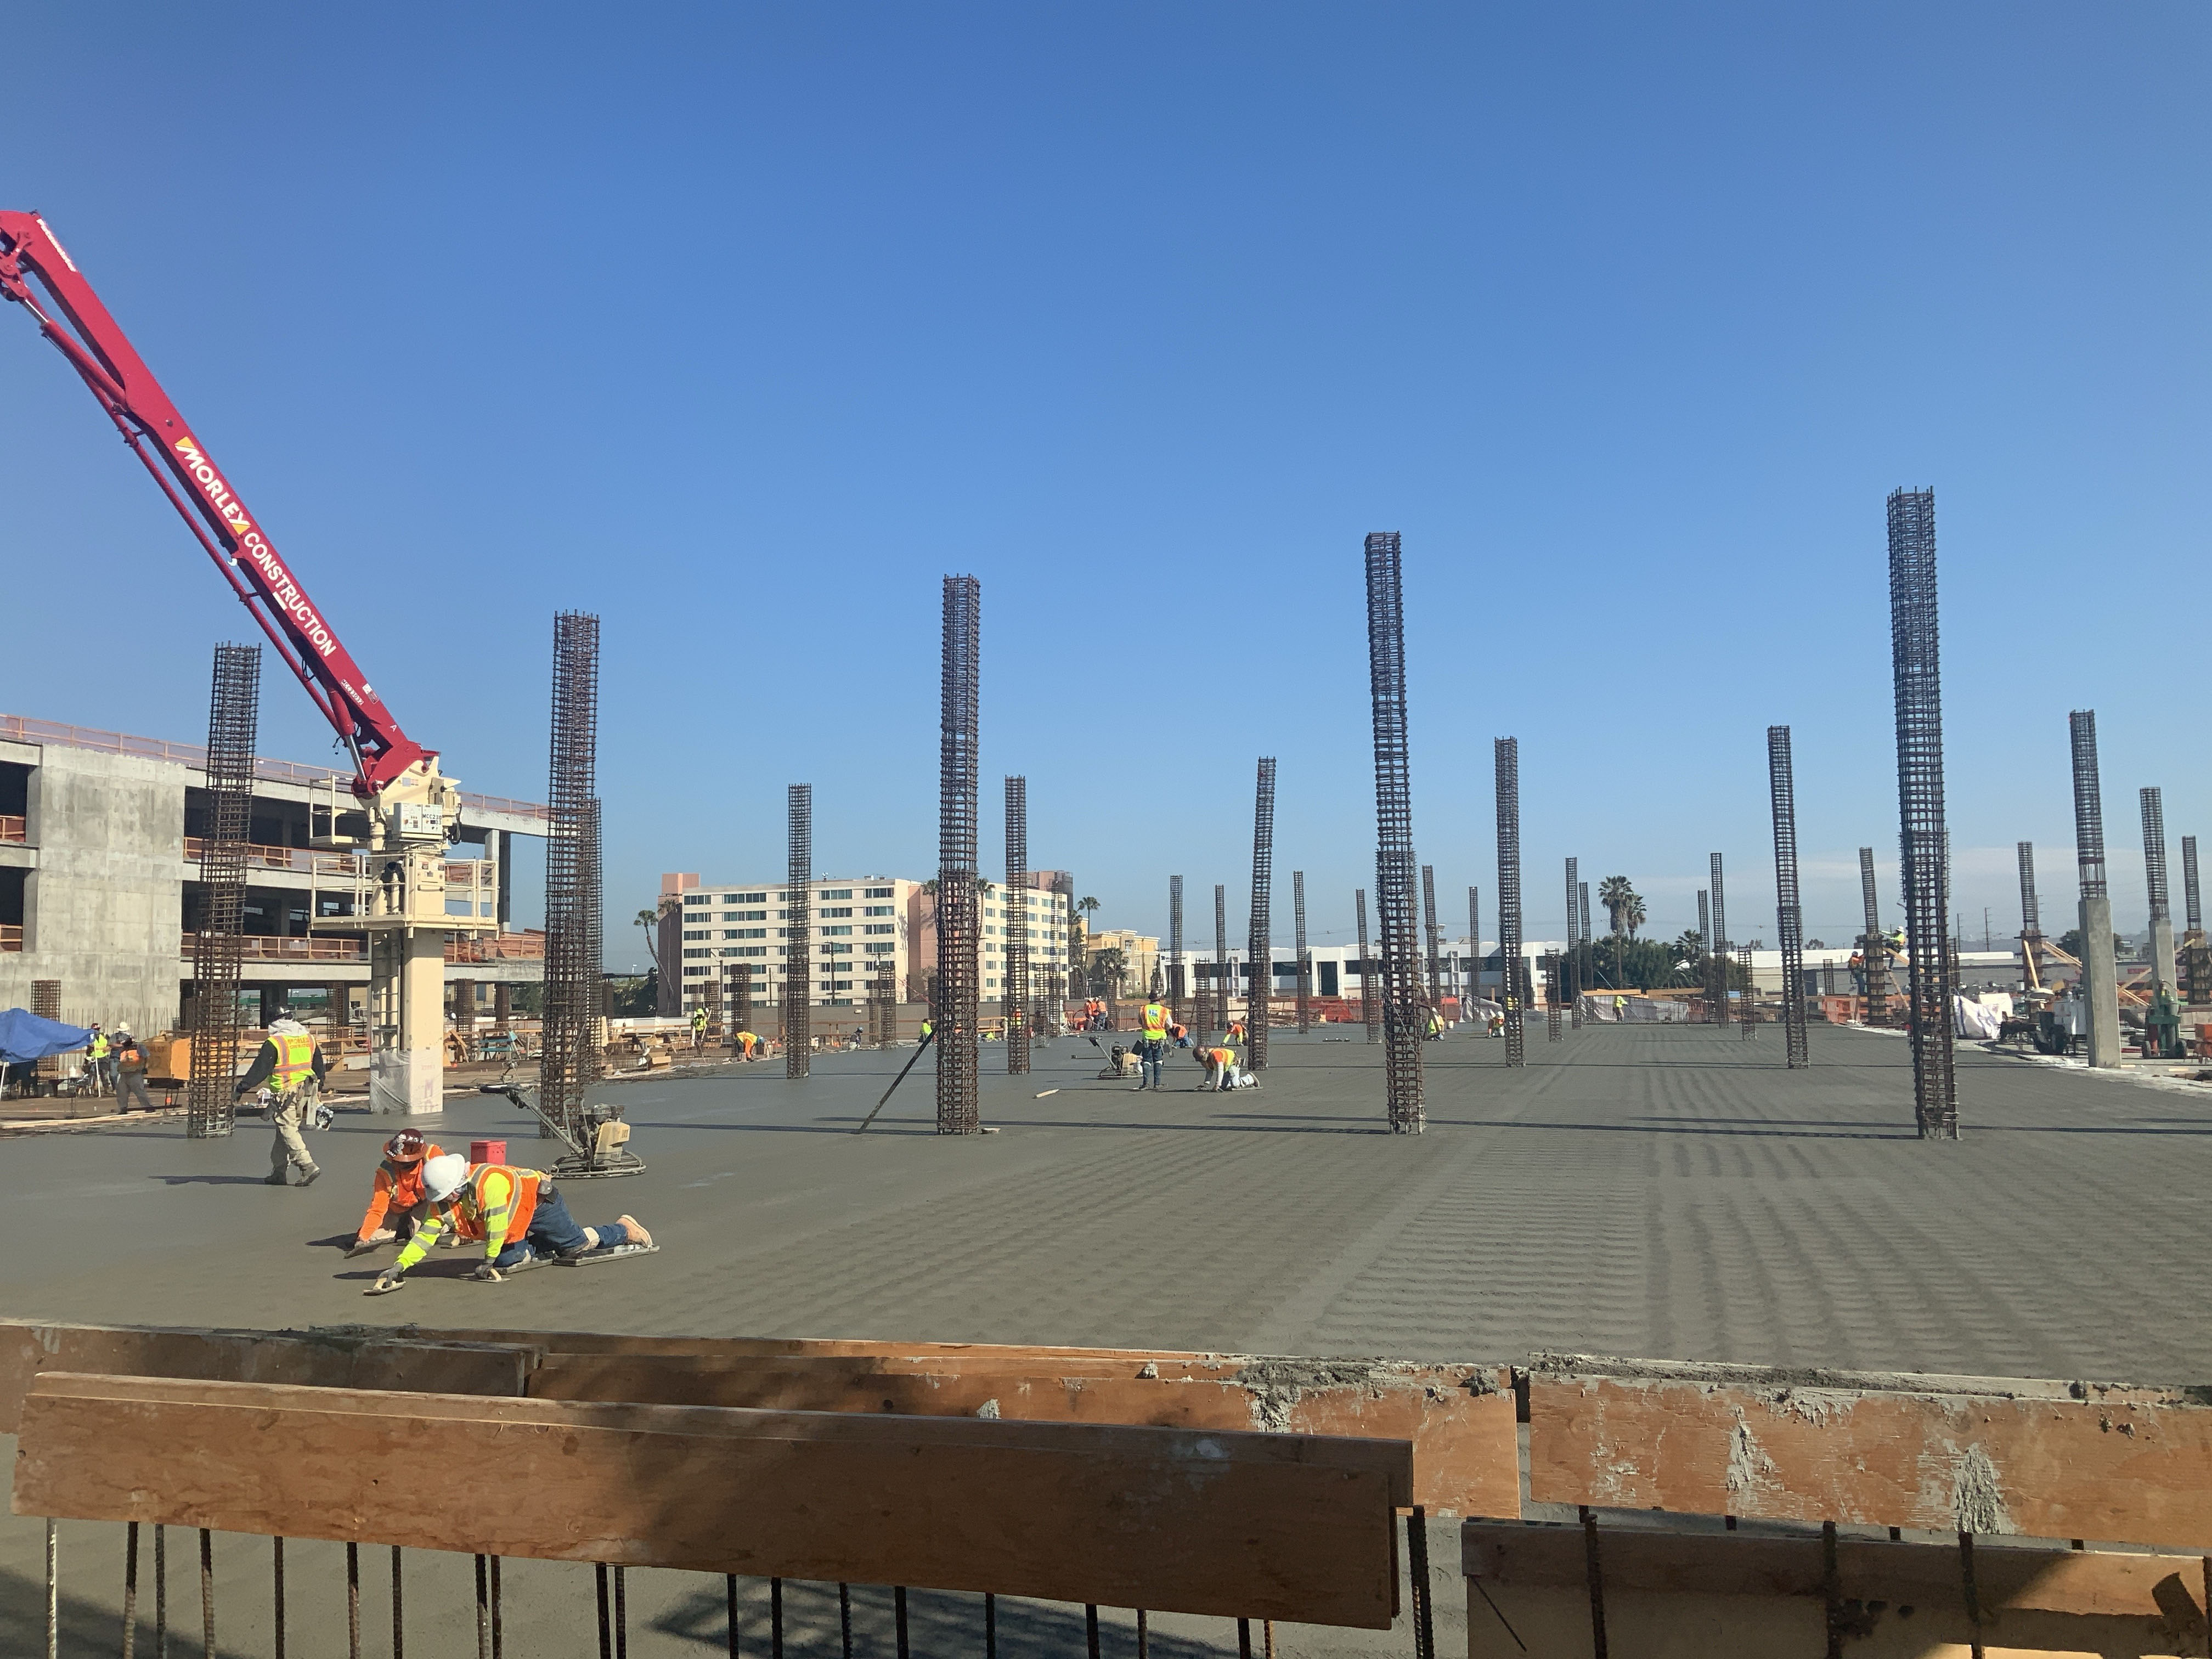 Finishers completing a concrete deck pour on the second level of Consolidated Rent-A-Car facility Idle Storage building.